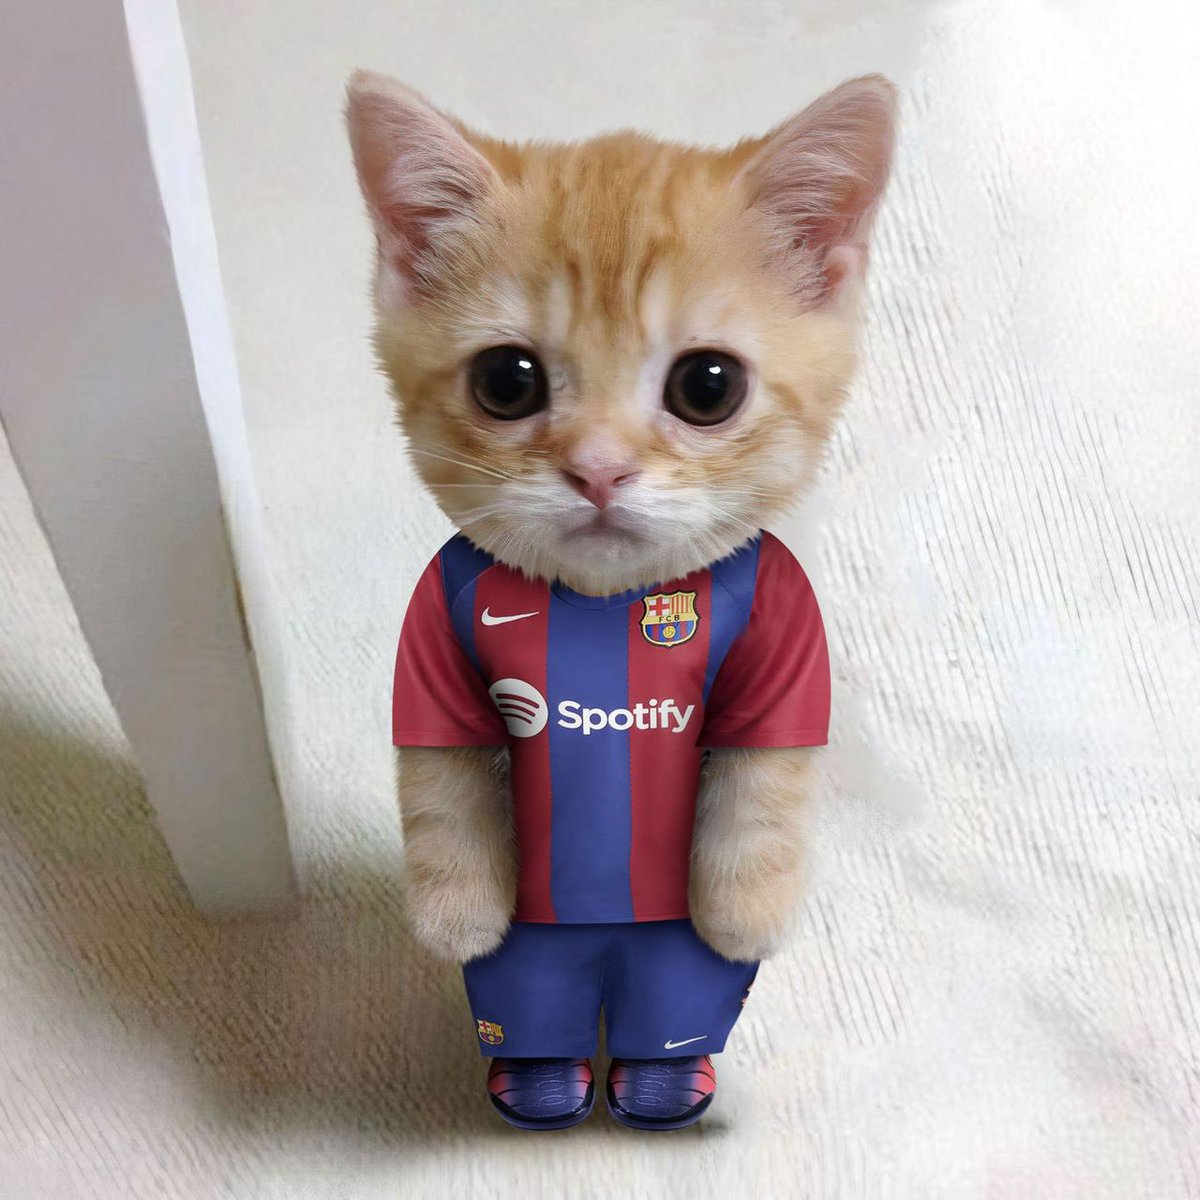 Do gatos watch football/soccer? 

Whoever guesses the right score for the ElClassico tonight at Final Time gets 1 sol!
Simply Like, RT, and comment below with your answer.

#ElClásico